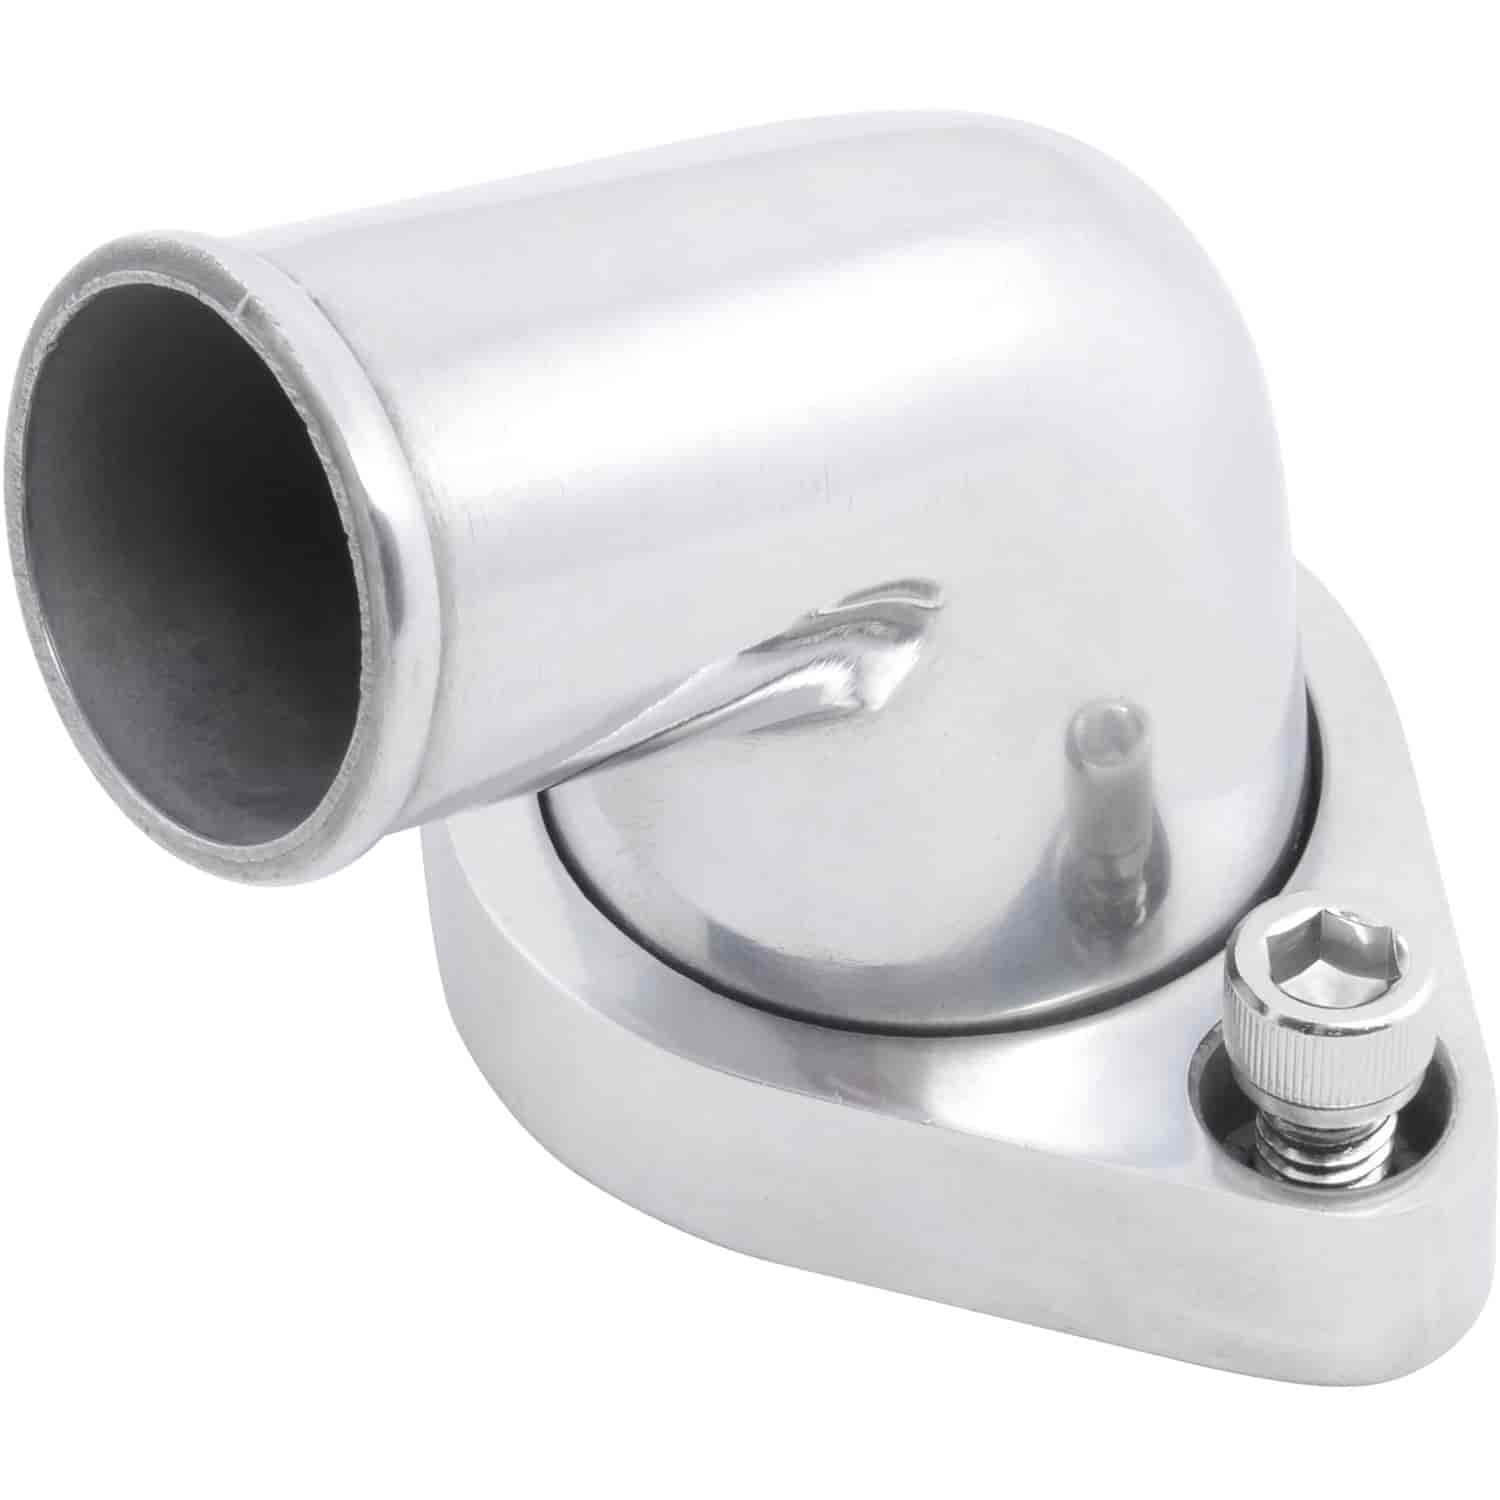 Weiand 6242 Aluminum Water Outlet Includes Thermostat Housing O-Ring Seal And Hardware 45 Degree Polished Neck Aluminum Water Outlet